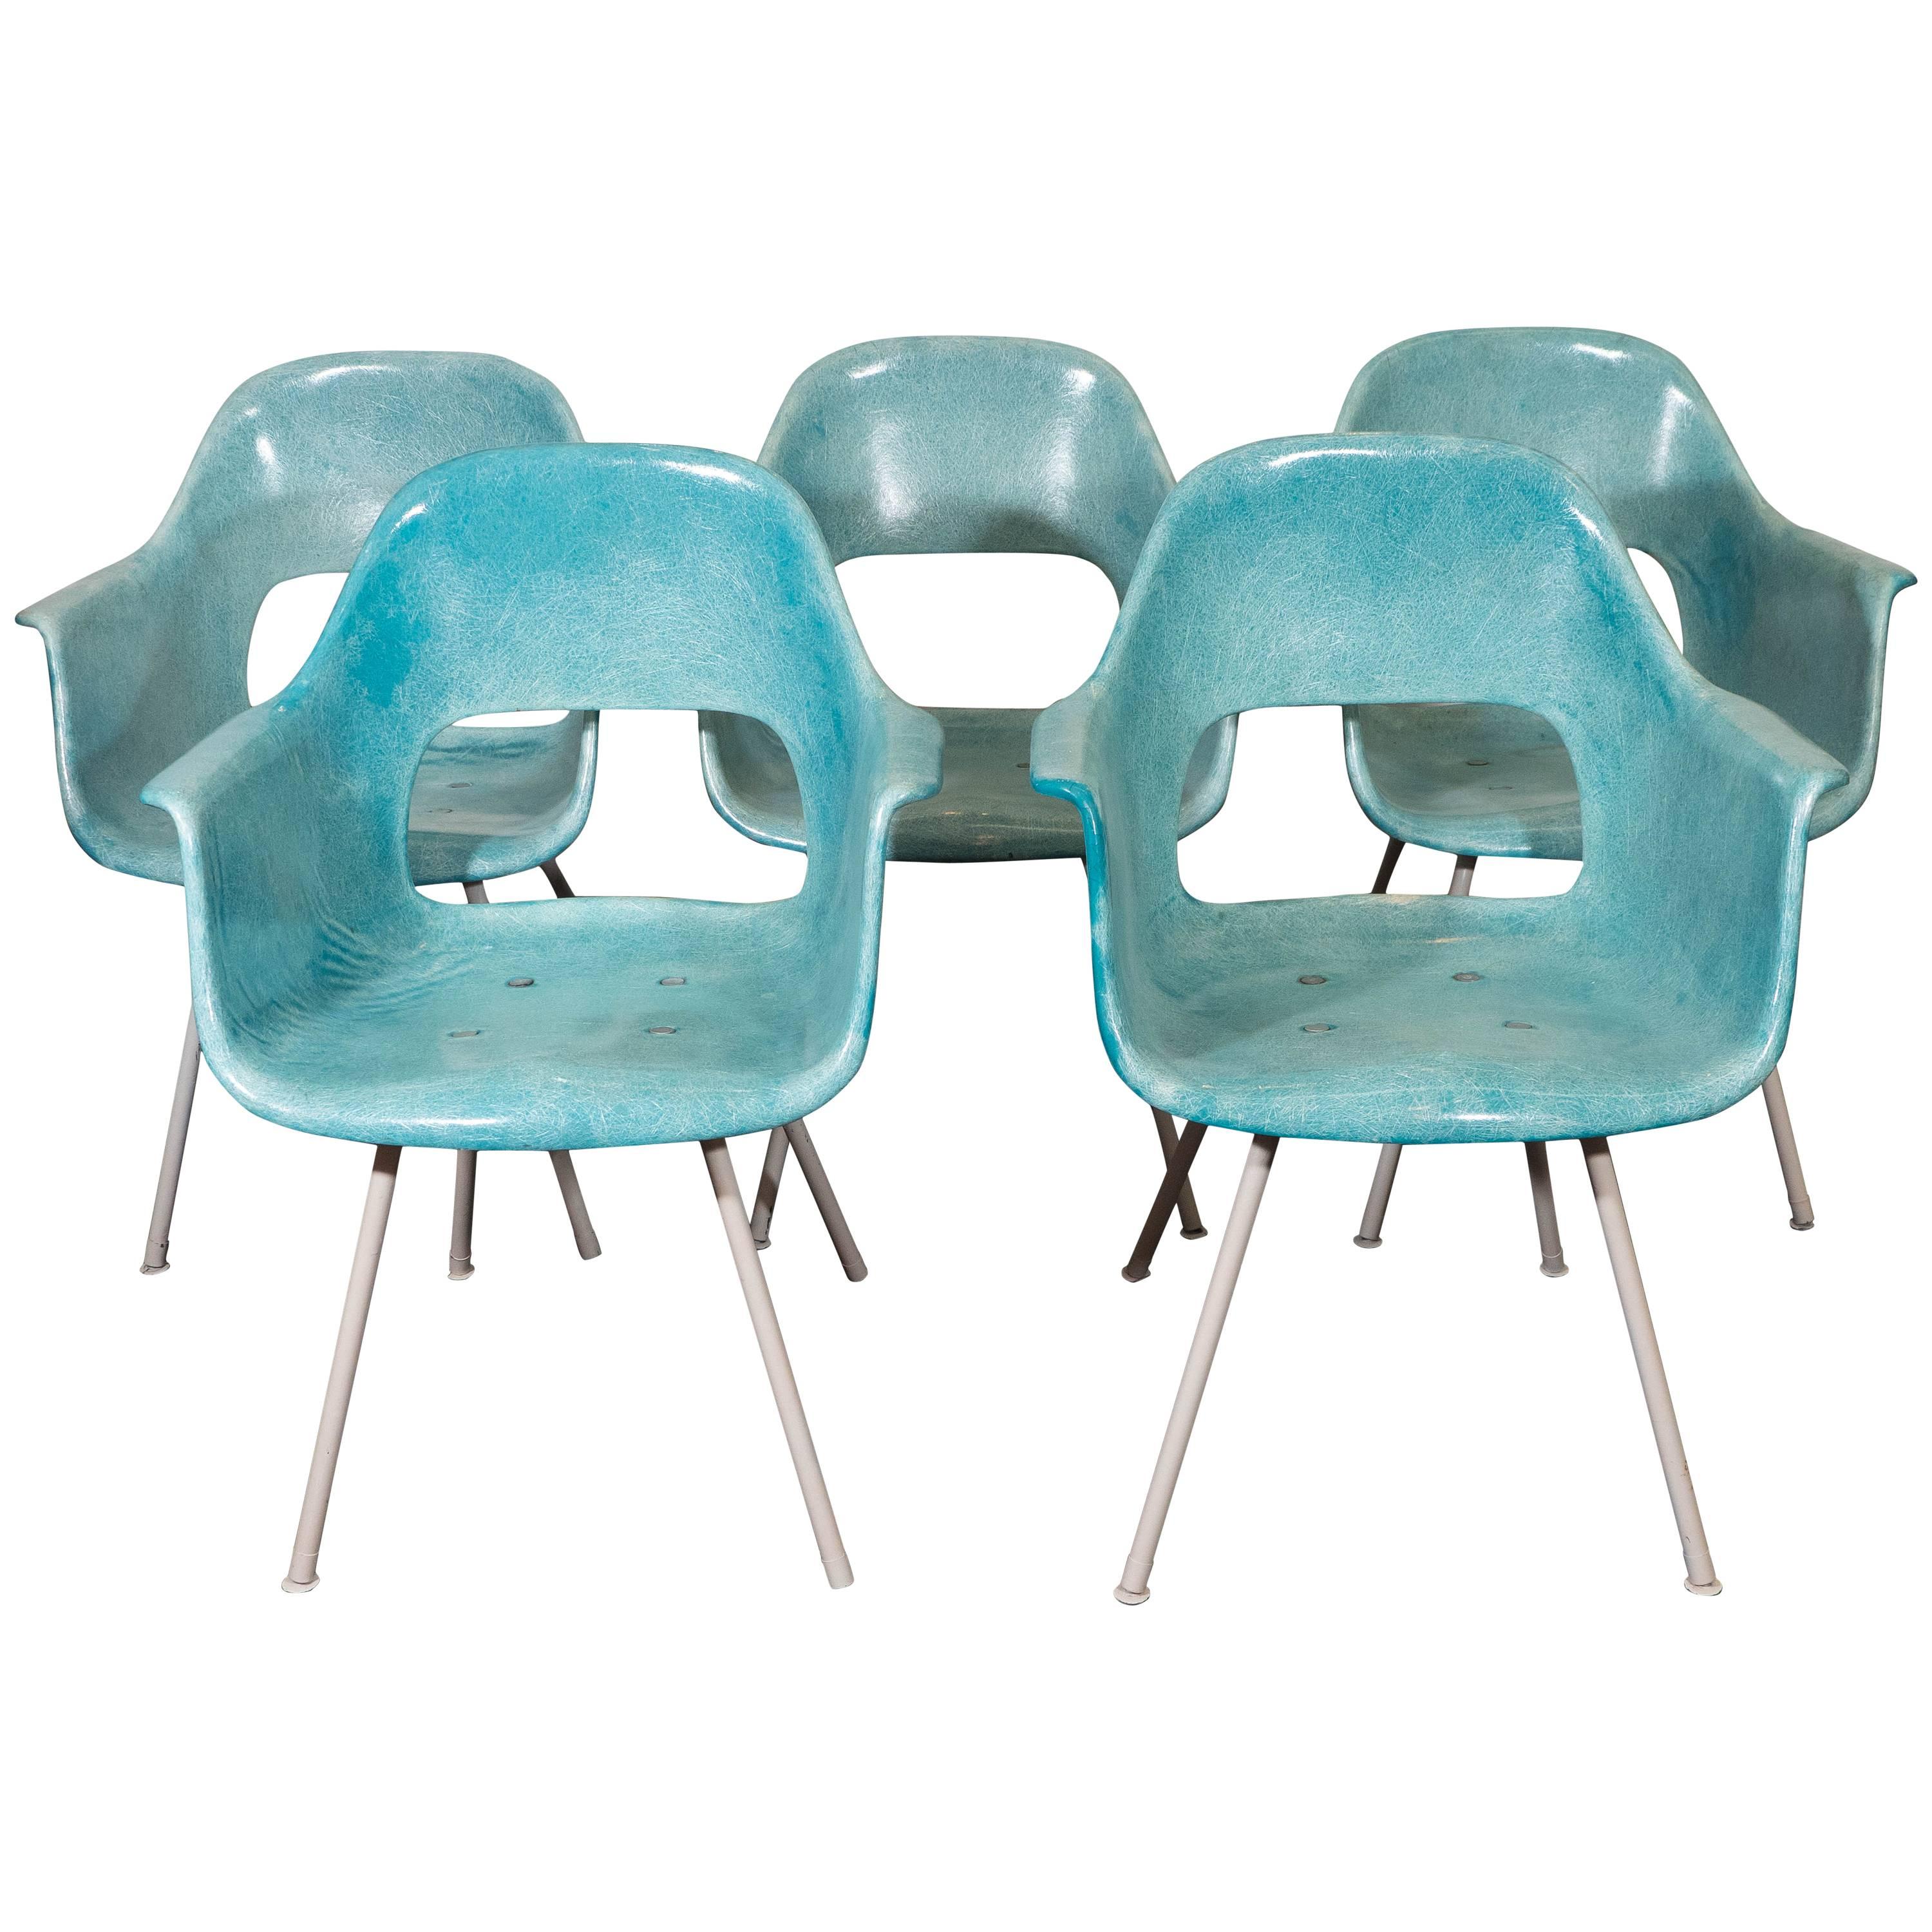 Set of Five Turquoise Fiberglass Armchairs in the Style of Eames